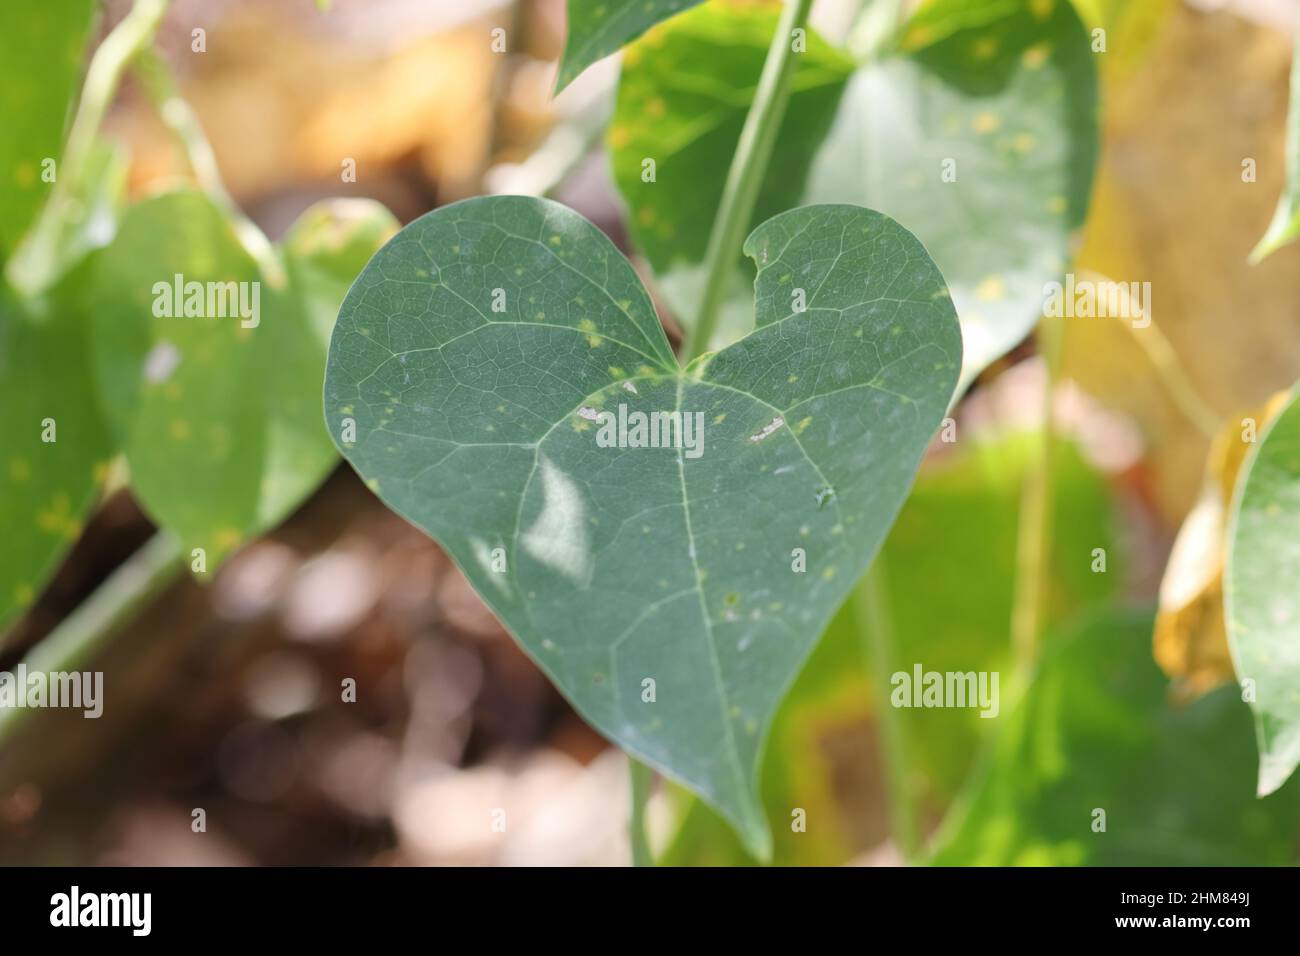 Close-up photo of Heart shaped green colored giloy leaf on a vine Stock Photo